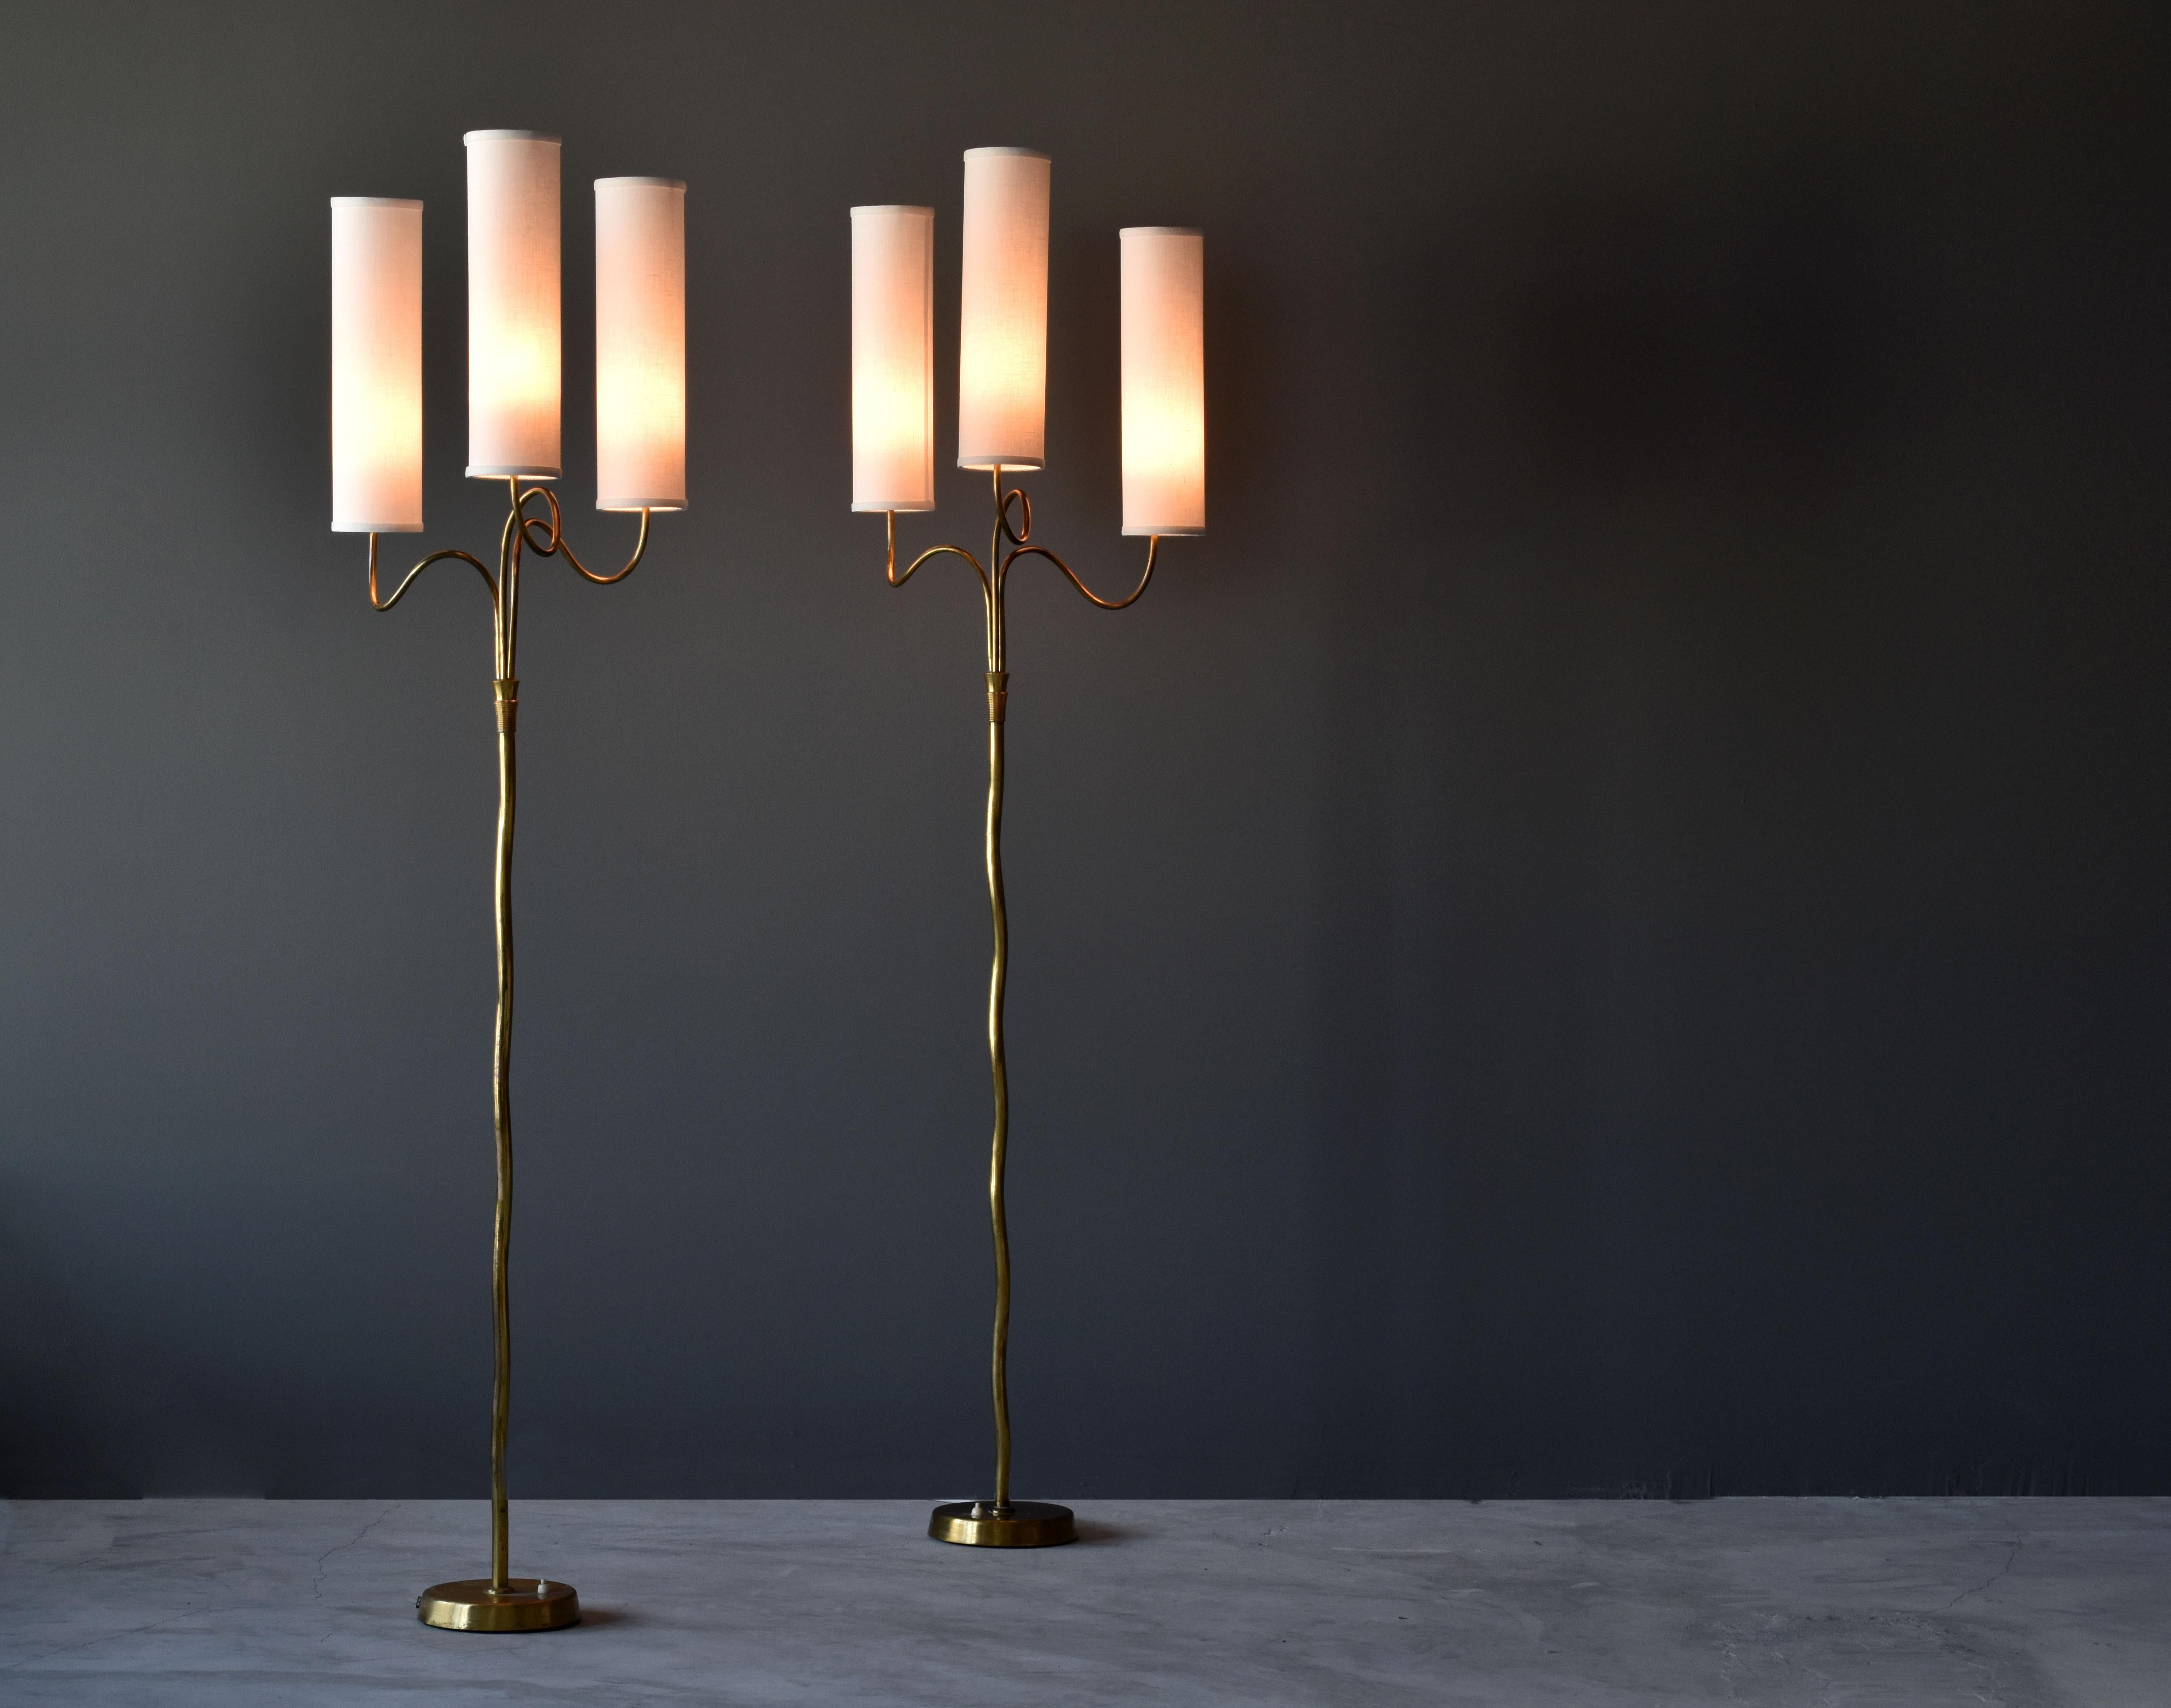 A pair of brass and fabric floor lamps, designer and manufacturer unknown. This is a prime representation of modernist lighting, Finland's strongest contribution to modernist design. 

Most likely produced in the late 1940s or early 1950s, possibly